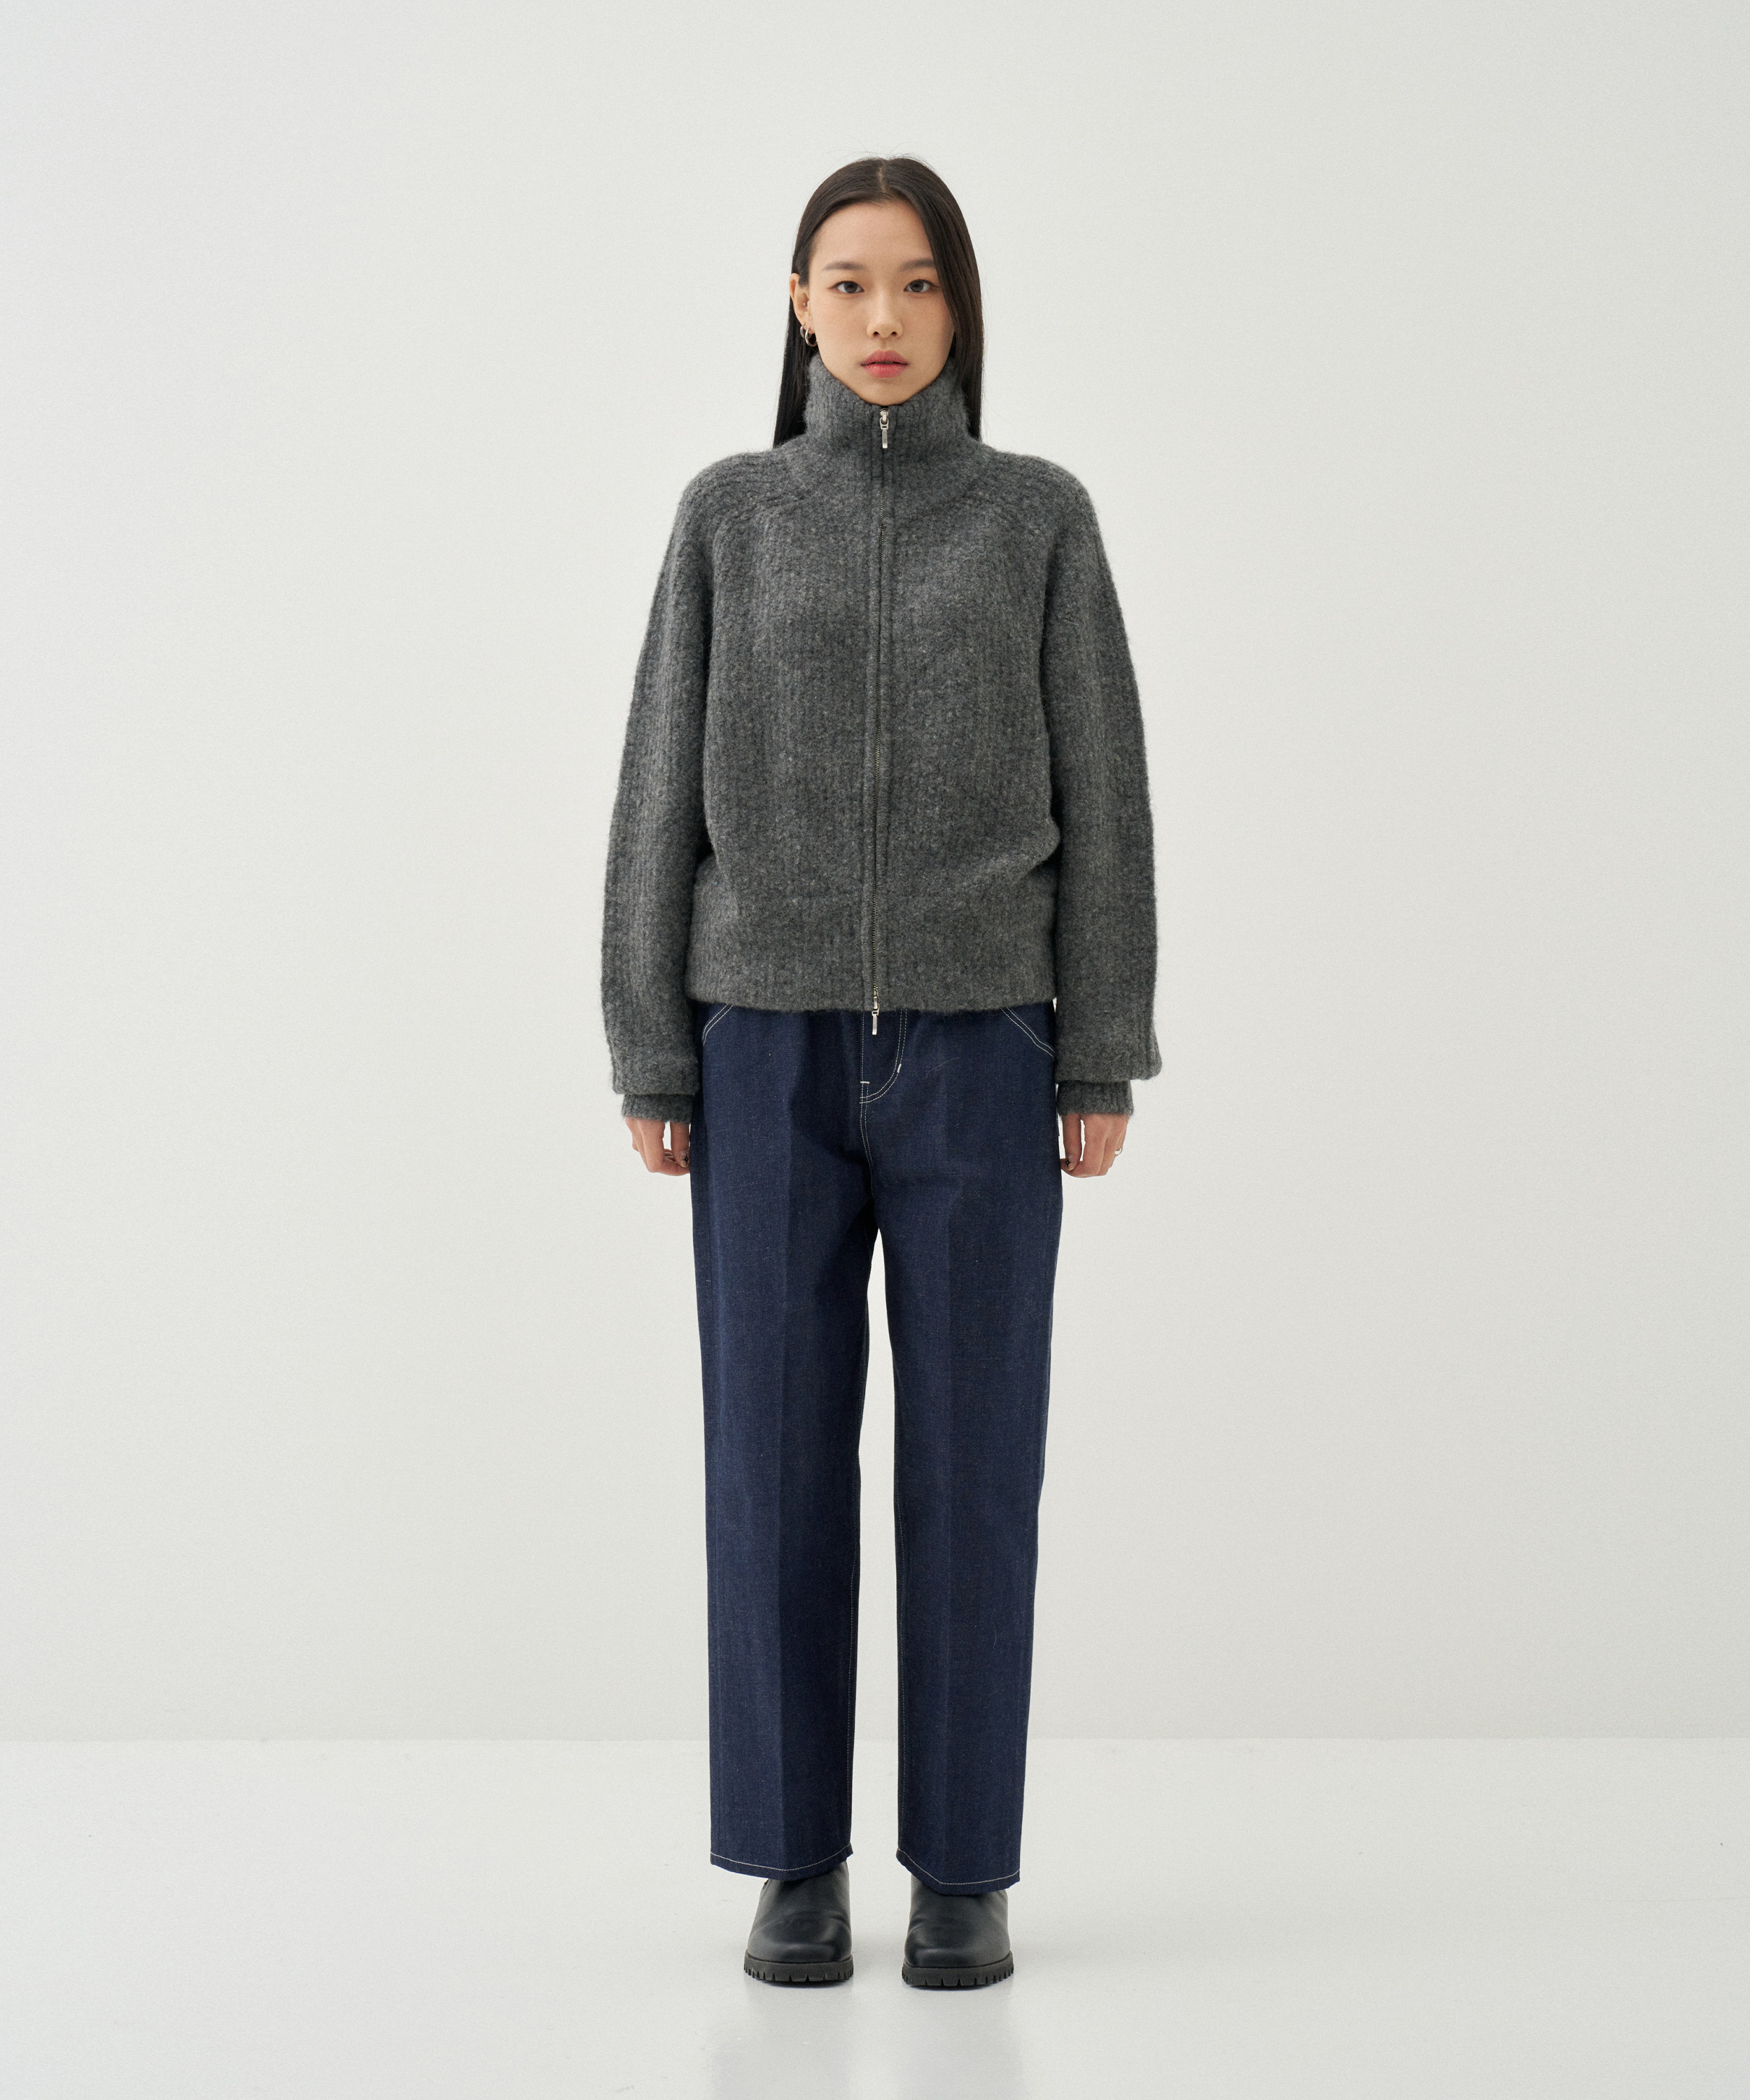 Cropped Drivers Knit (Charcoal)